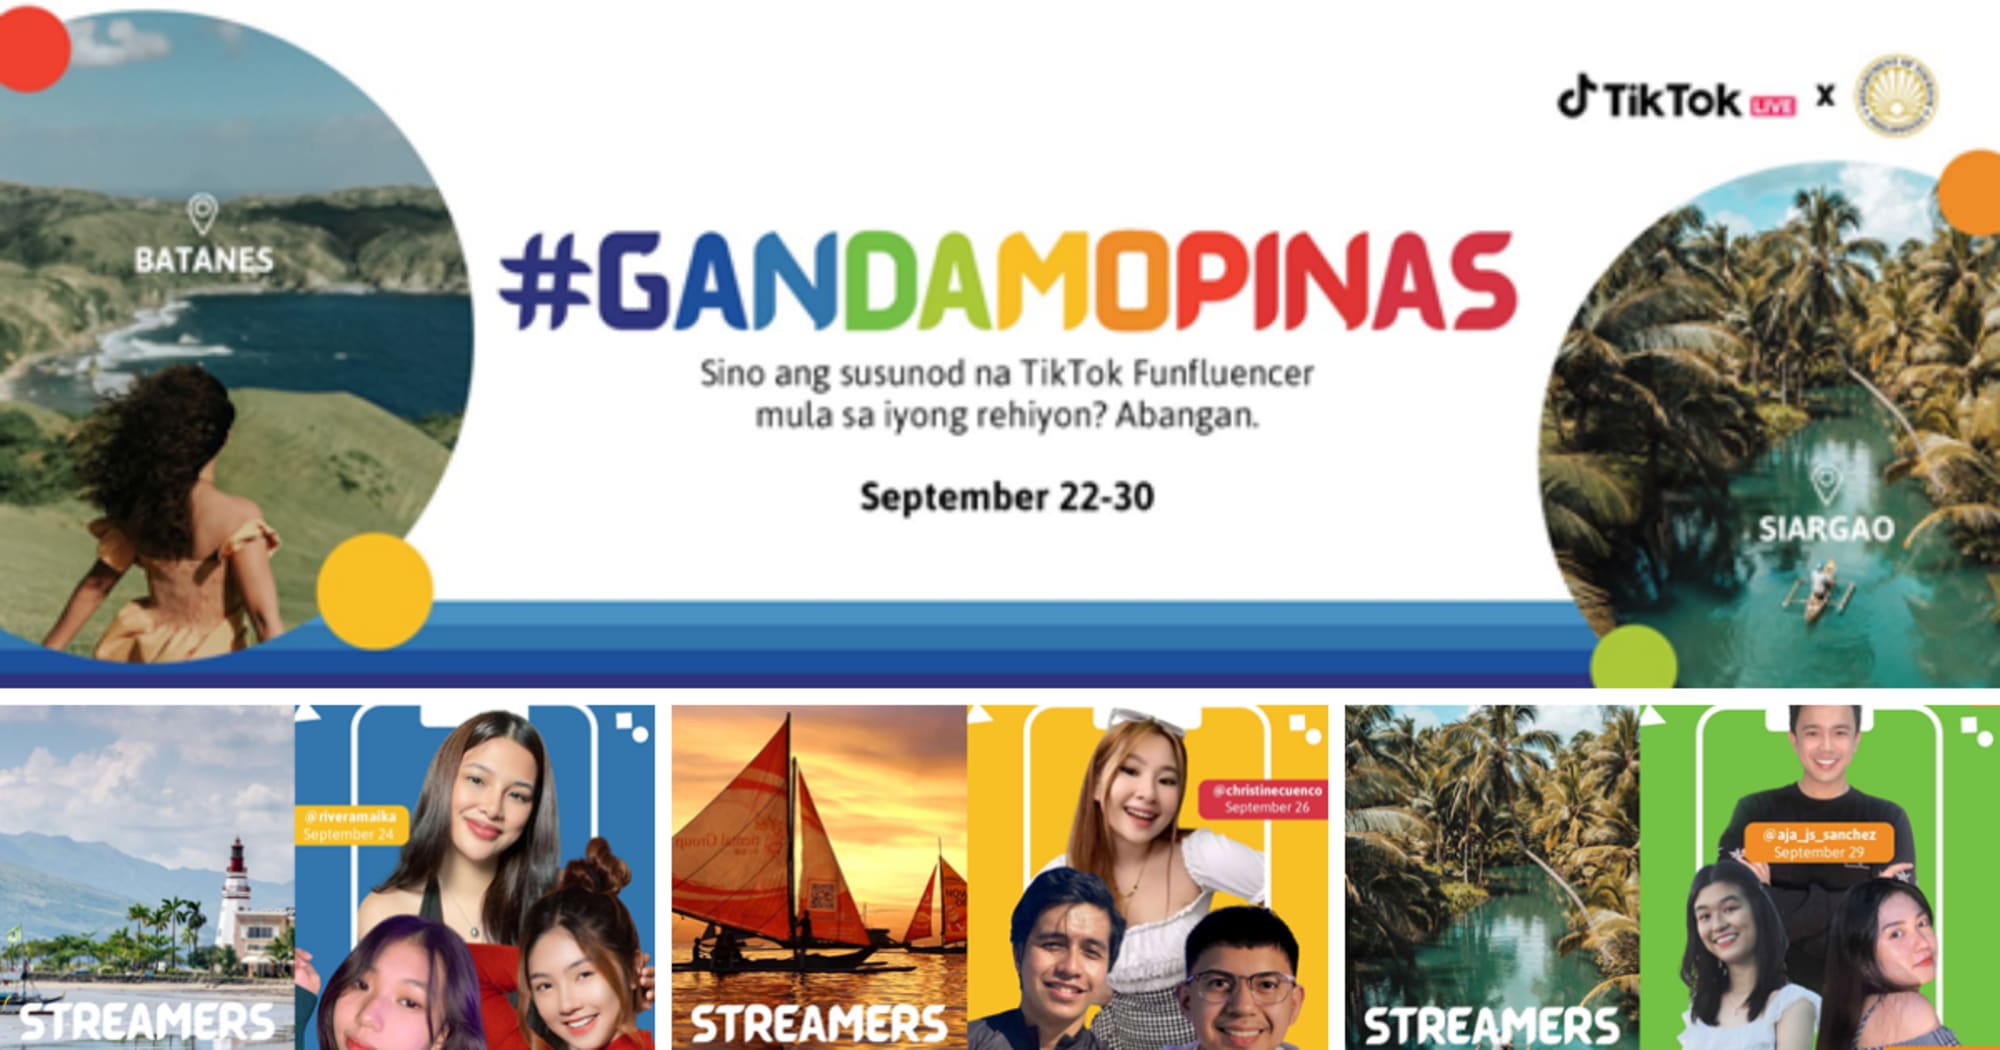 DOT and Tiktok launch #GandaMoPinas Campaign; don't miss the live TikTok sessions of various creators, view their schedule here